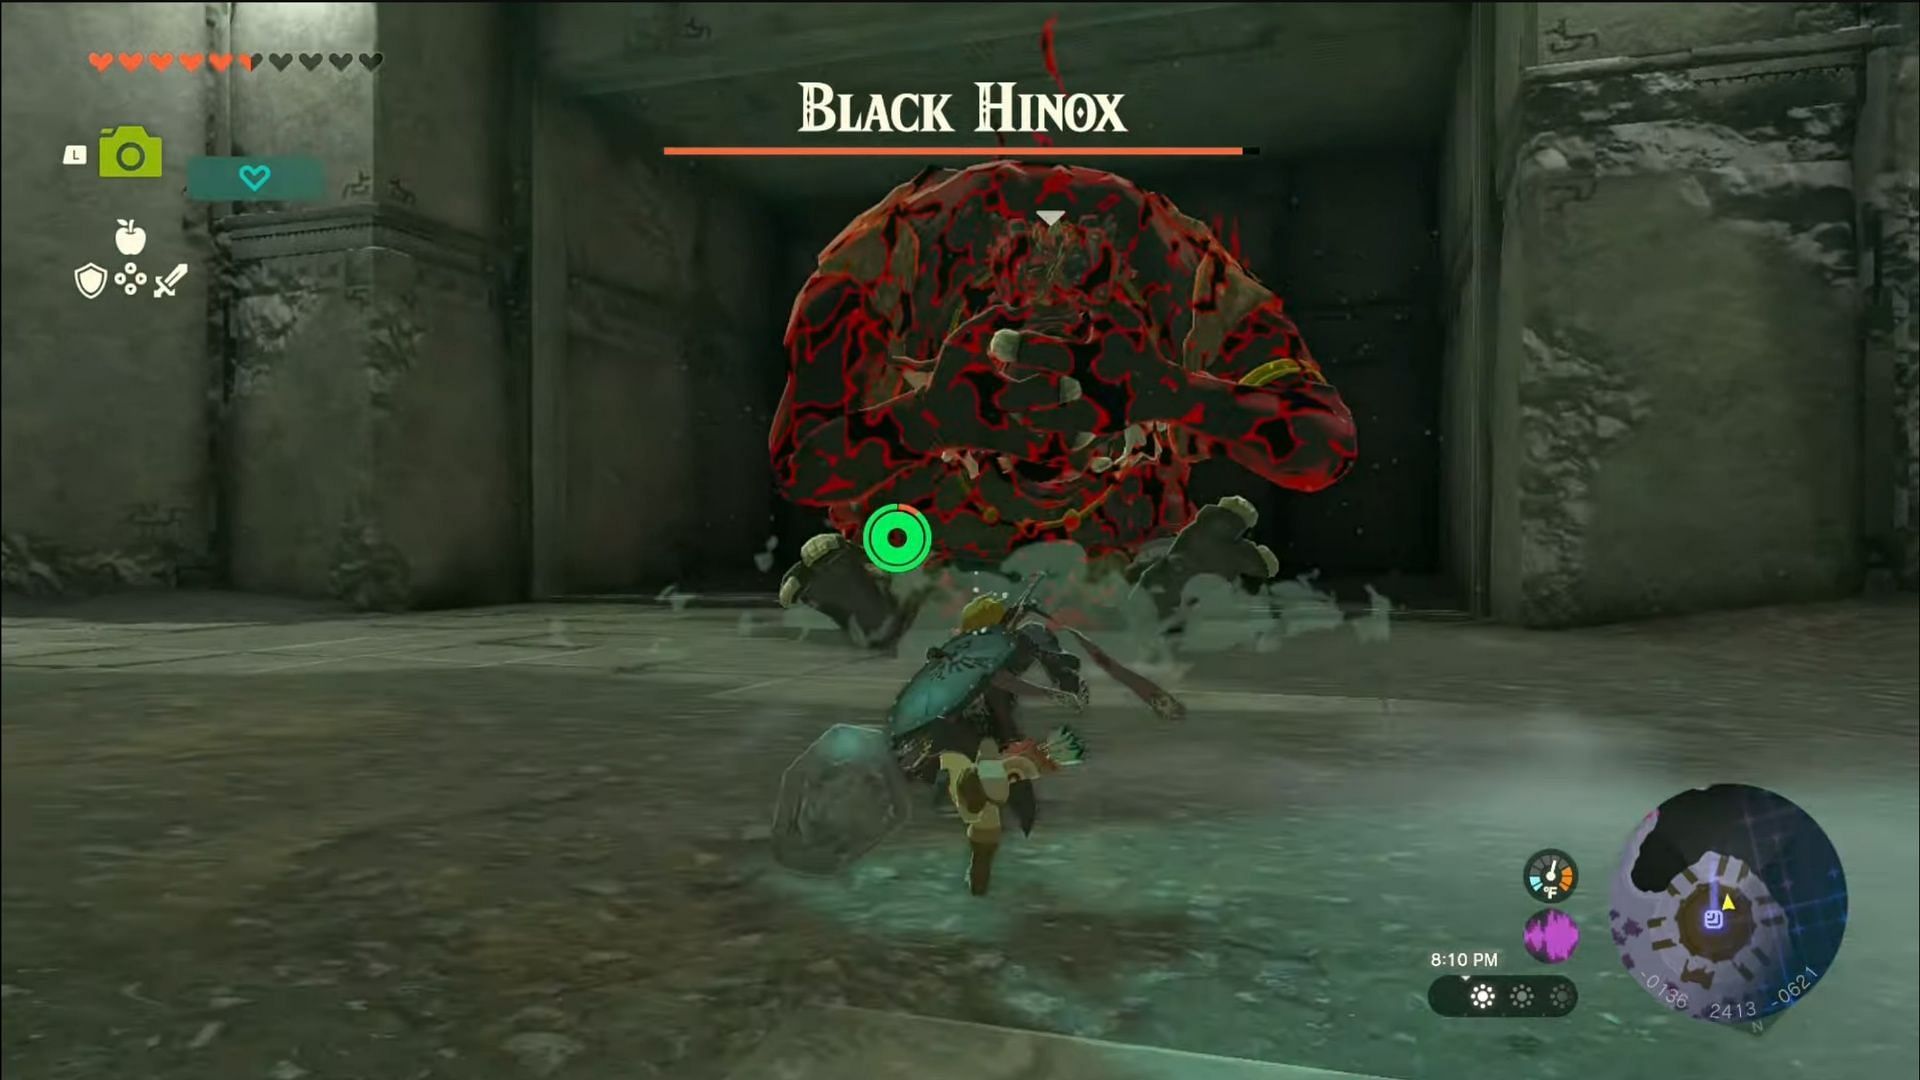 The one-eyed Hinox boss is challenging but you can defeat it in The Legend of Zelda Tears of the Kingdom.